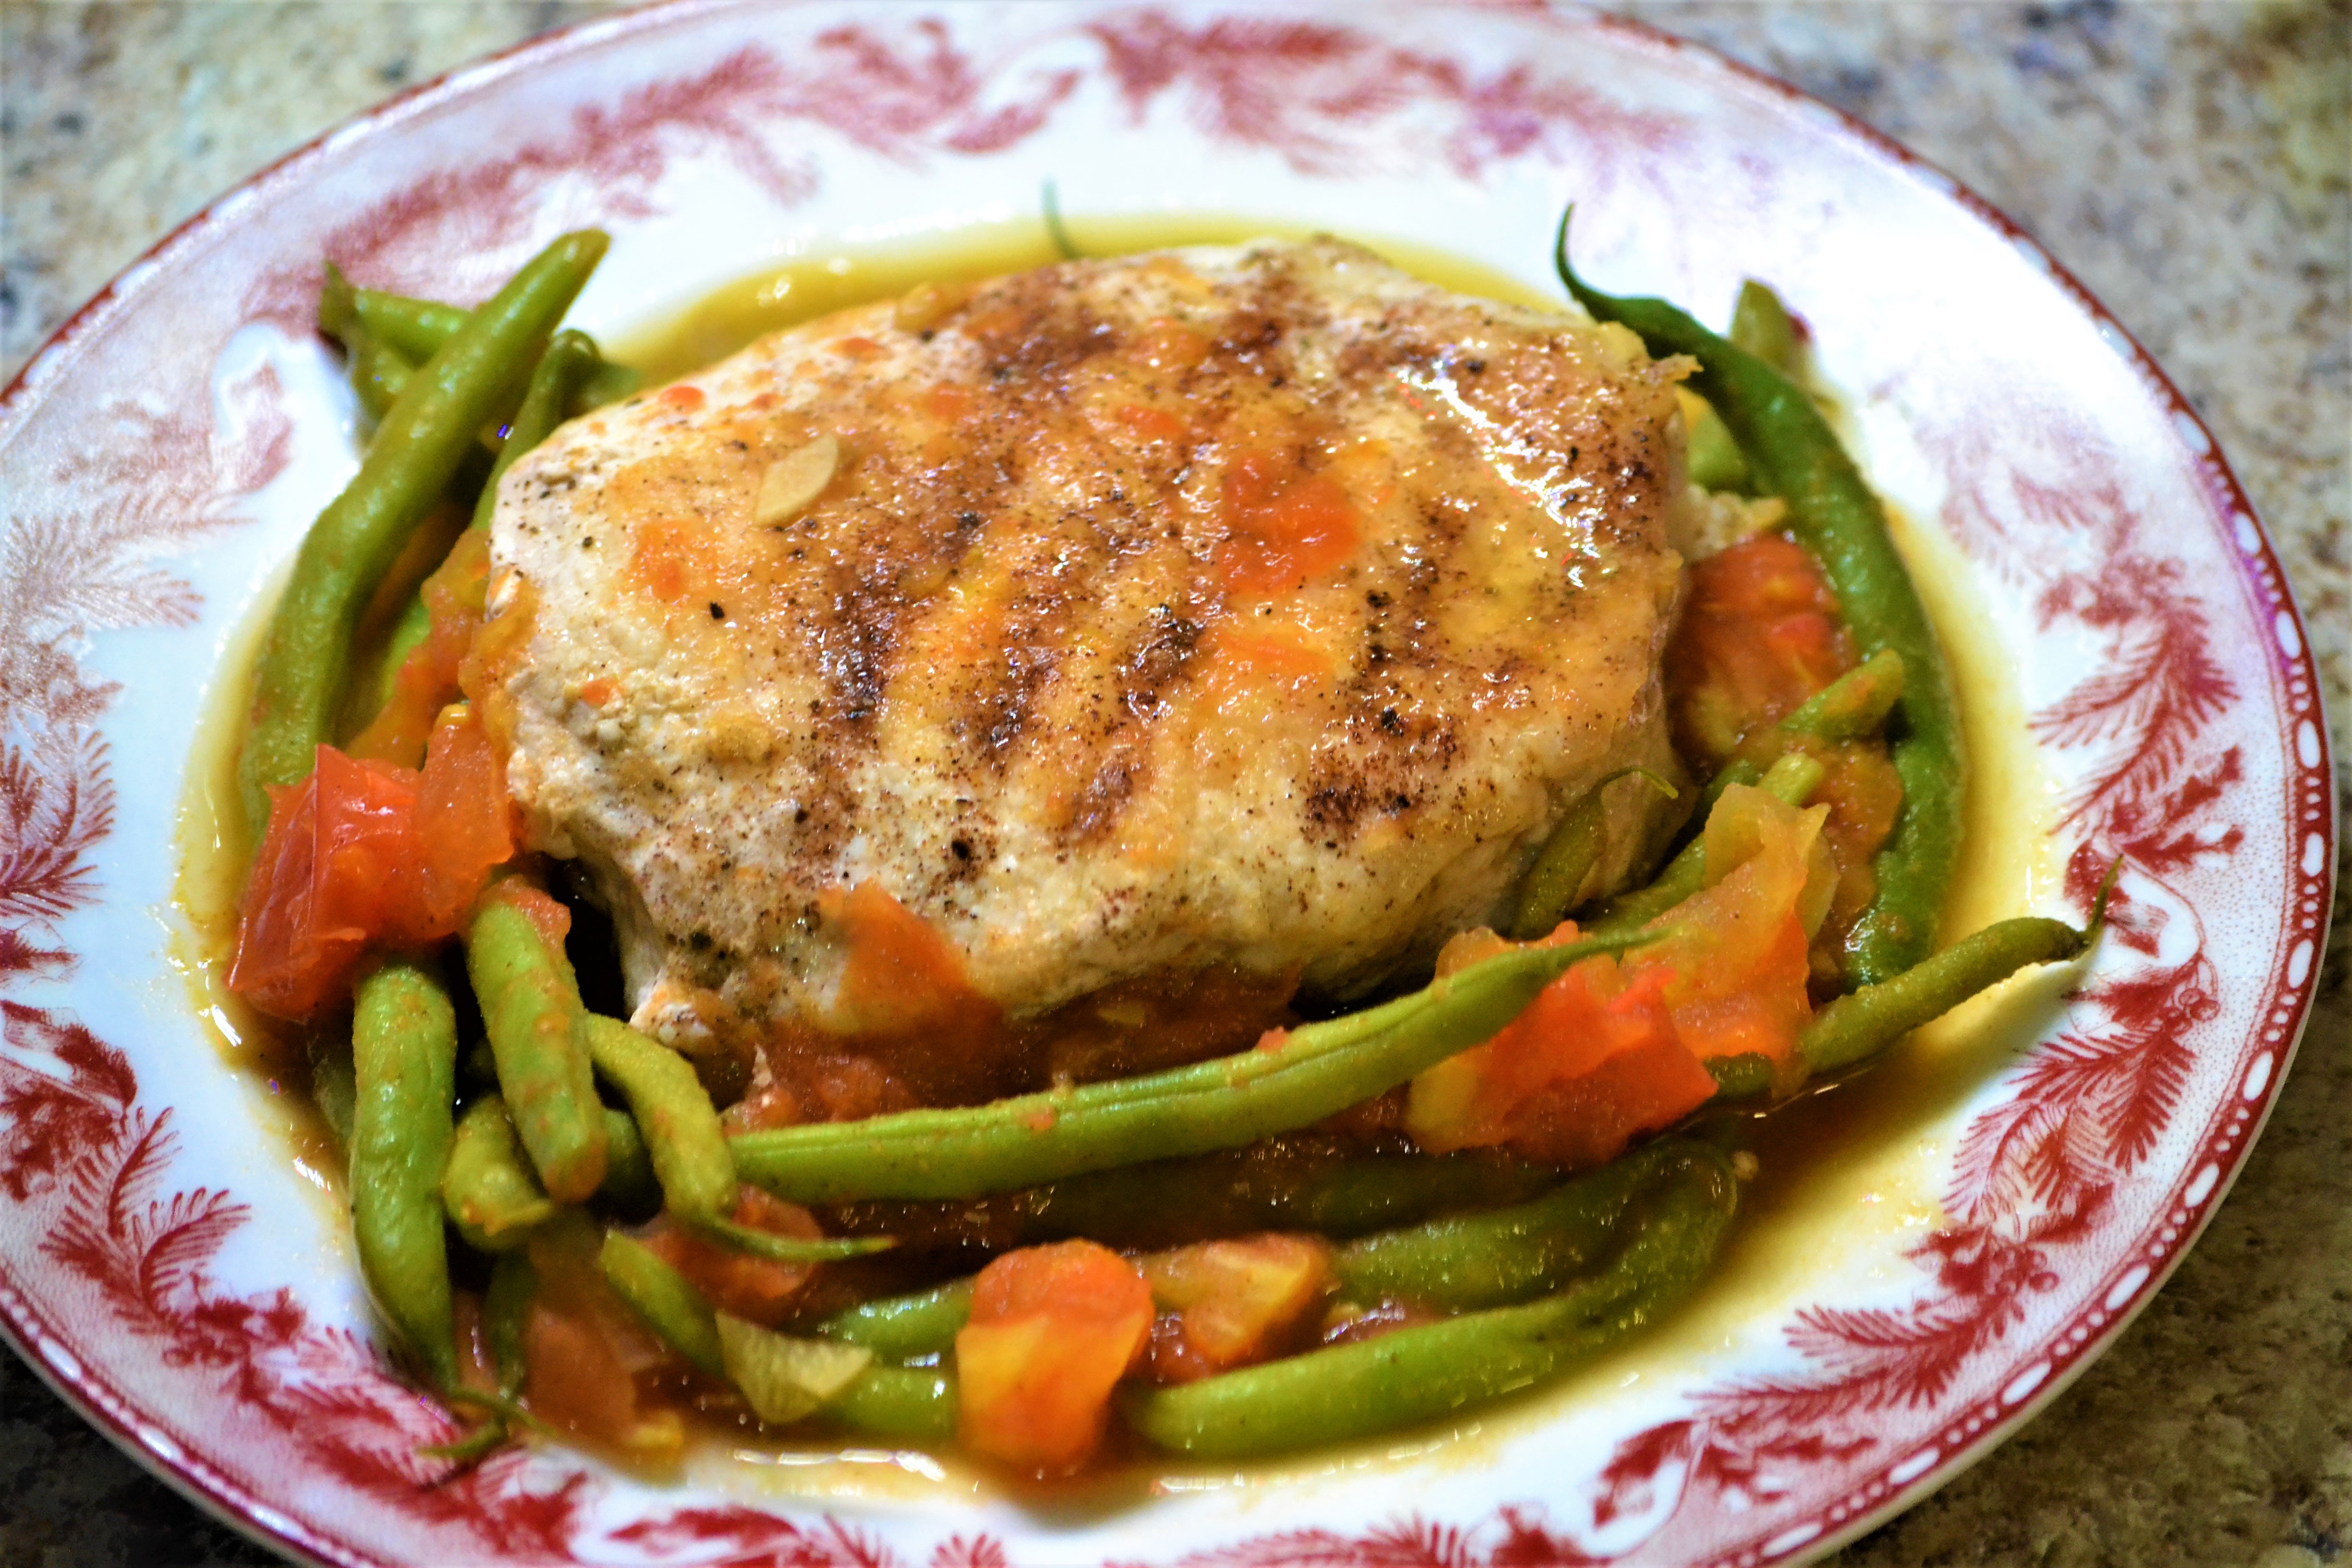 Cinnamon Pork Chops with Green Beans and Tomatoes